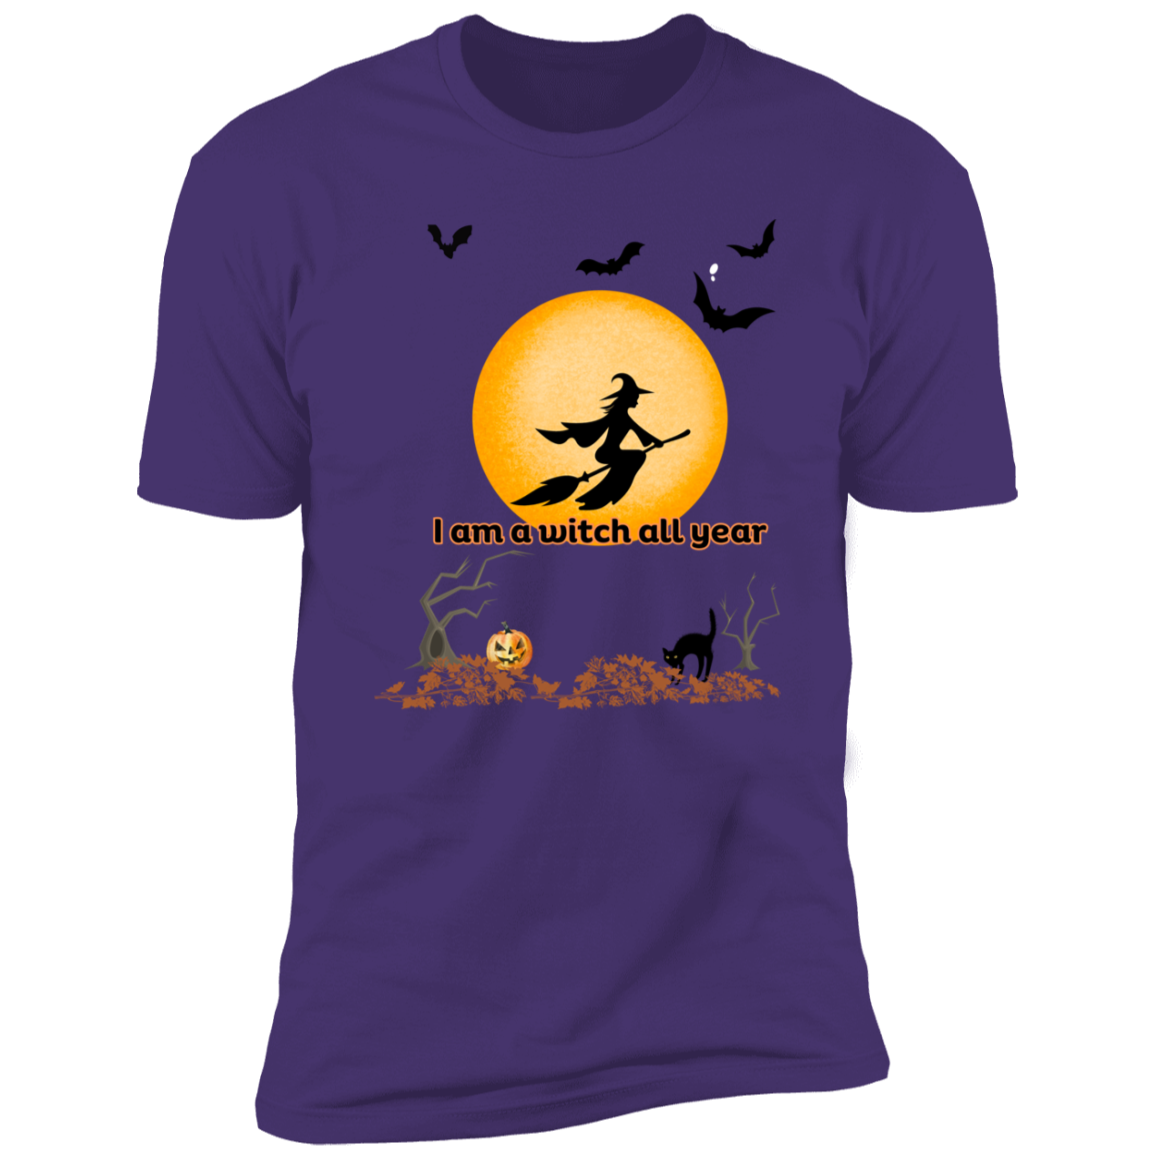 Get trendy with I am a witch all year Premium Short Sleeve Tee - T-Shirts available at Good Gift Company. Grab yours for $18 today!